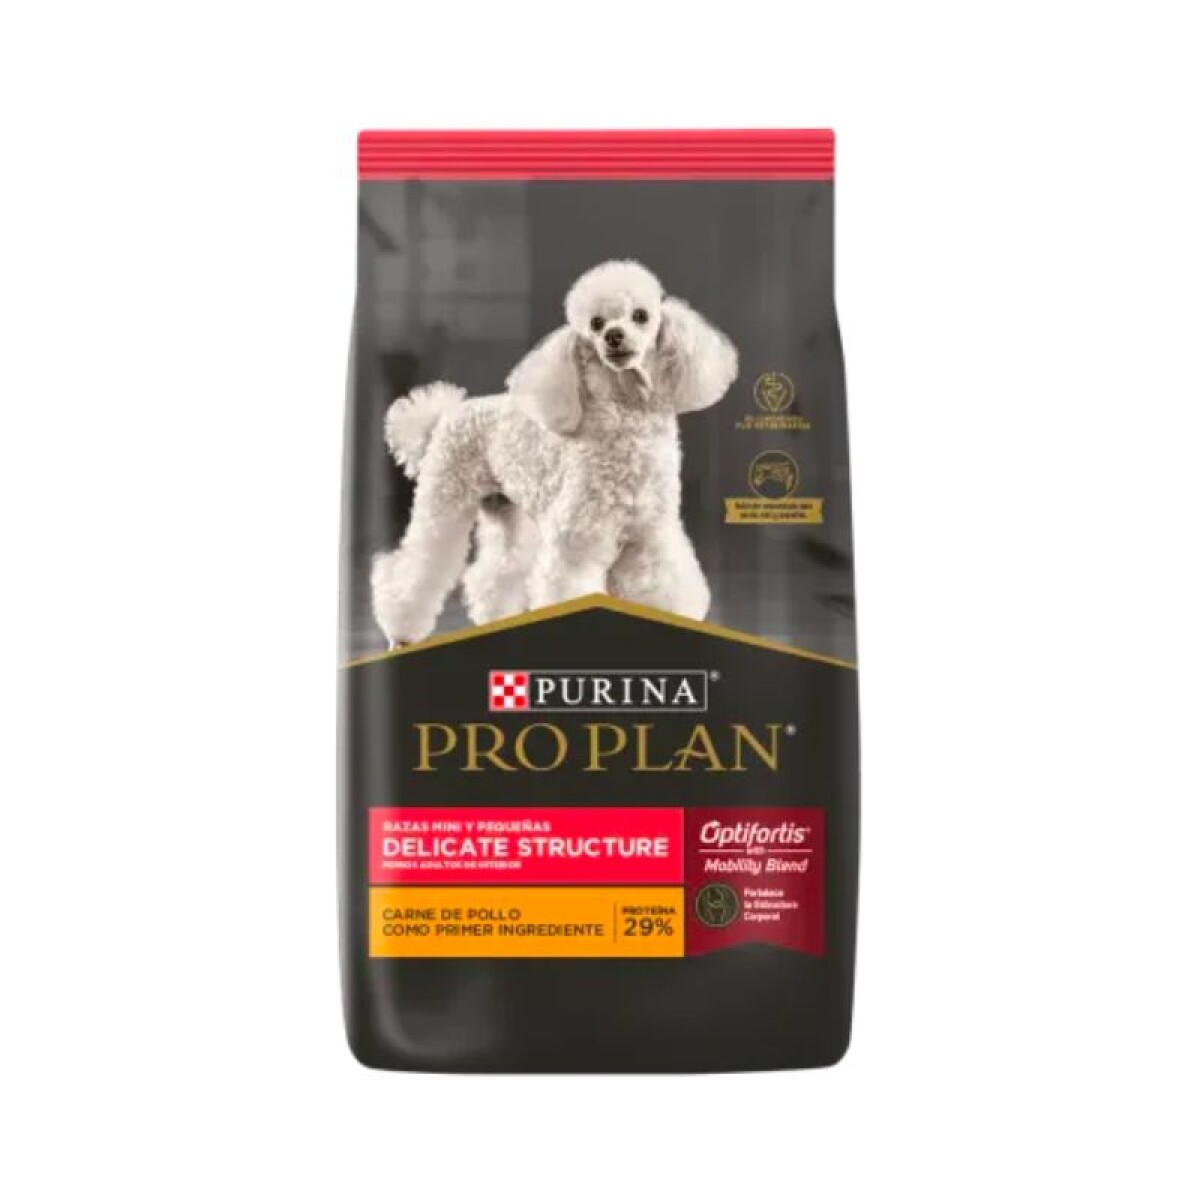 PROPLAN DELICATE STRUCTURE 1KG - Proplan Delicate Structure 1kg 